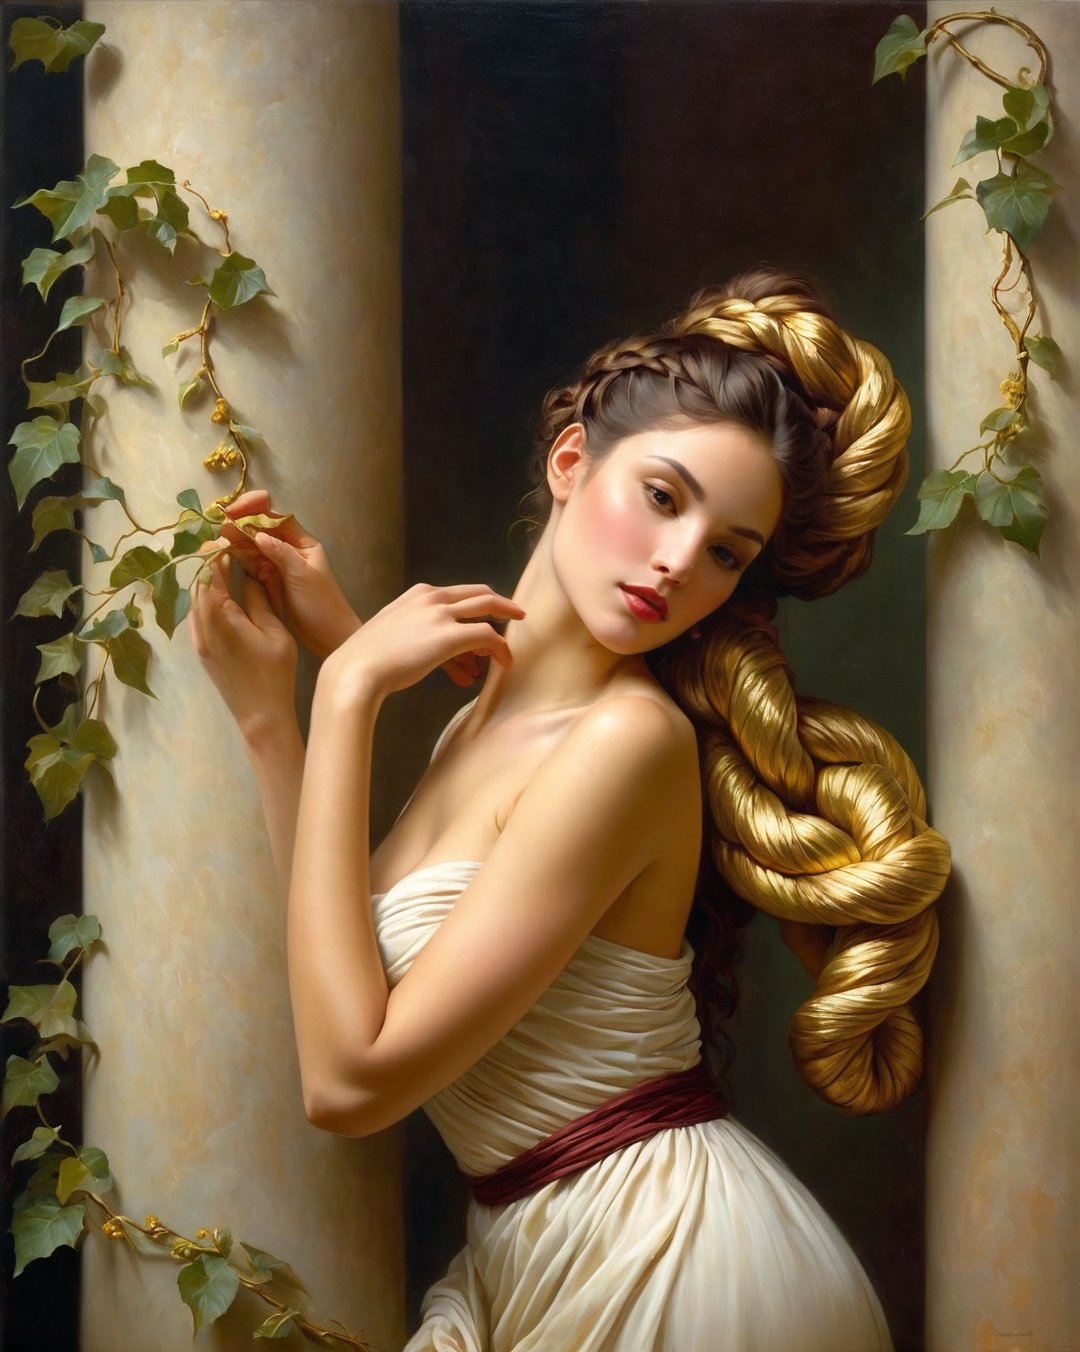 Eve and the tempting serpent. Ewa, a stunningly beautiful woman, grace and grace, beautiful hair braided into a bun falling on the neck, beautiful shapely body, covered with a long dress, ivy entwining the column, (delicate sfumato, soft color transitions: 2) "color gradient from gold to burgundy", Painting inspired by the Bouguereau style, (intricate chiaroscuro, layered oil techniques, detailed drapery, masterful brush painting, realistic textures, classic motifs, dramatic light sources), (ethereal auras, harmonious composition, captivating portraits, serene landscapes, anatomical precision, delicate hand gestures, timeless beauty, humanistic expression, emotive poses, intricate backgrounds, symbolic elements), photo r3al. ,greg rutkowski